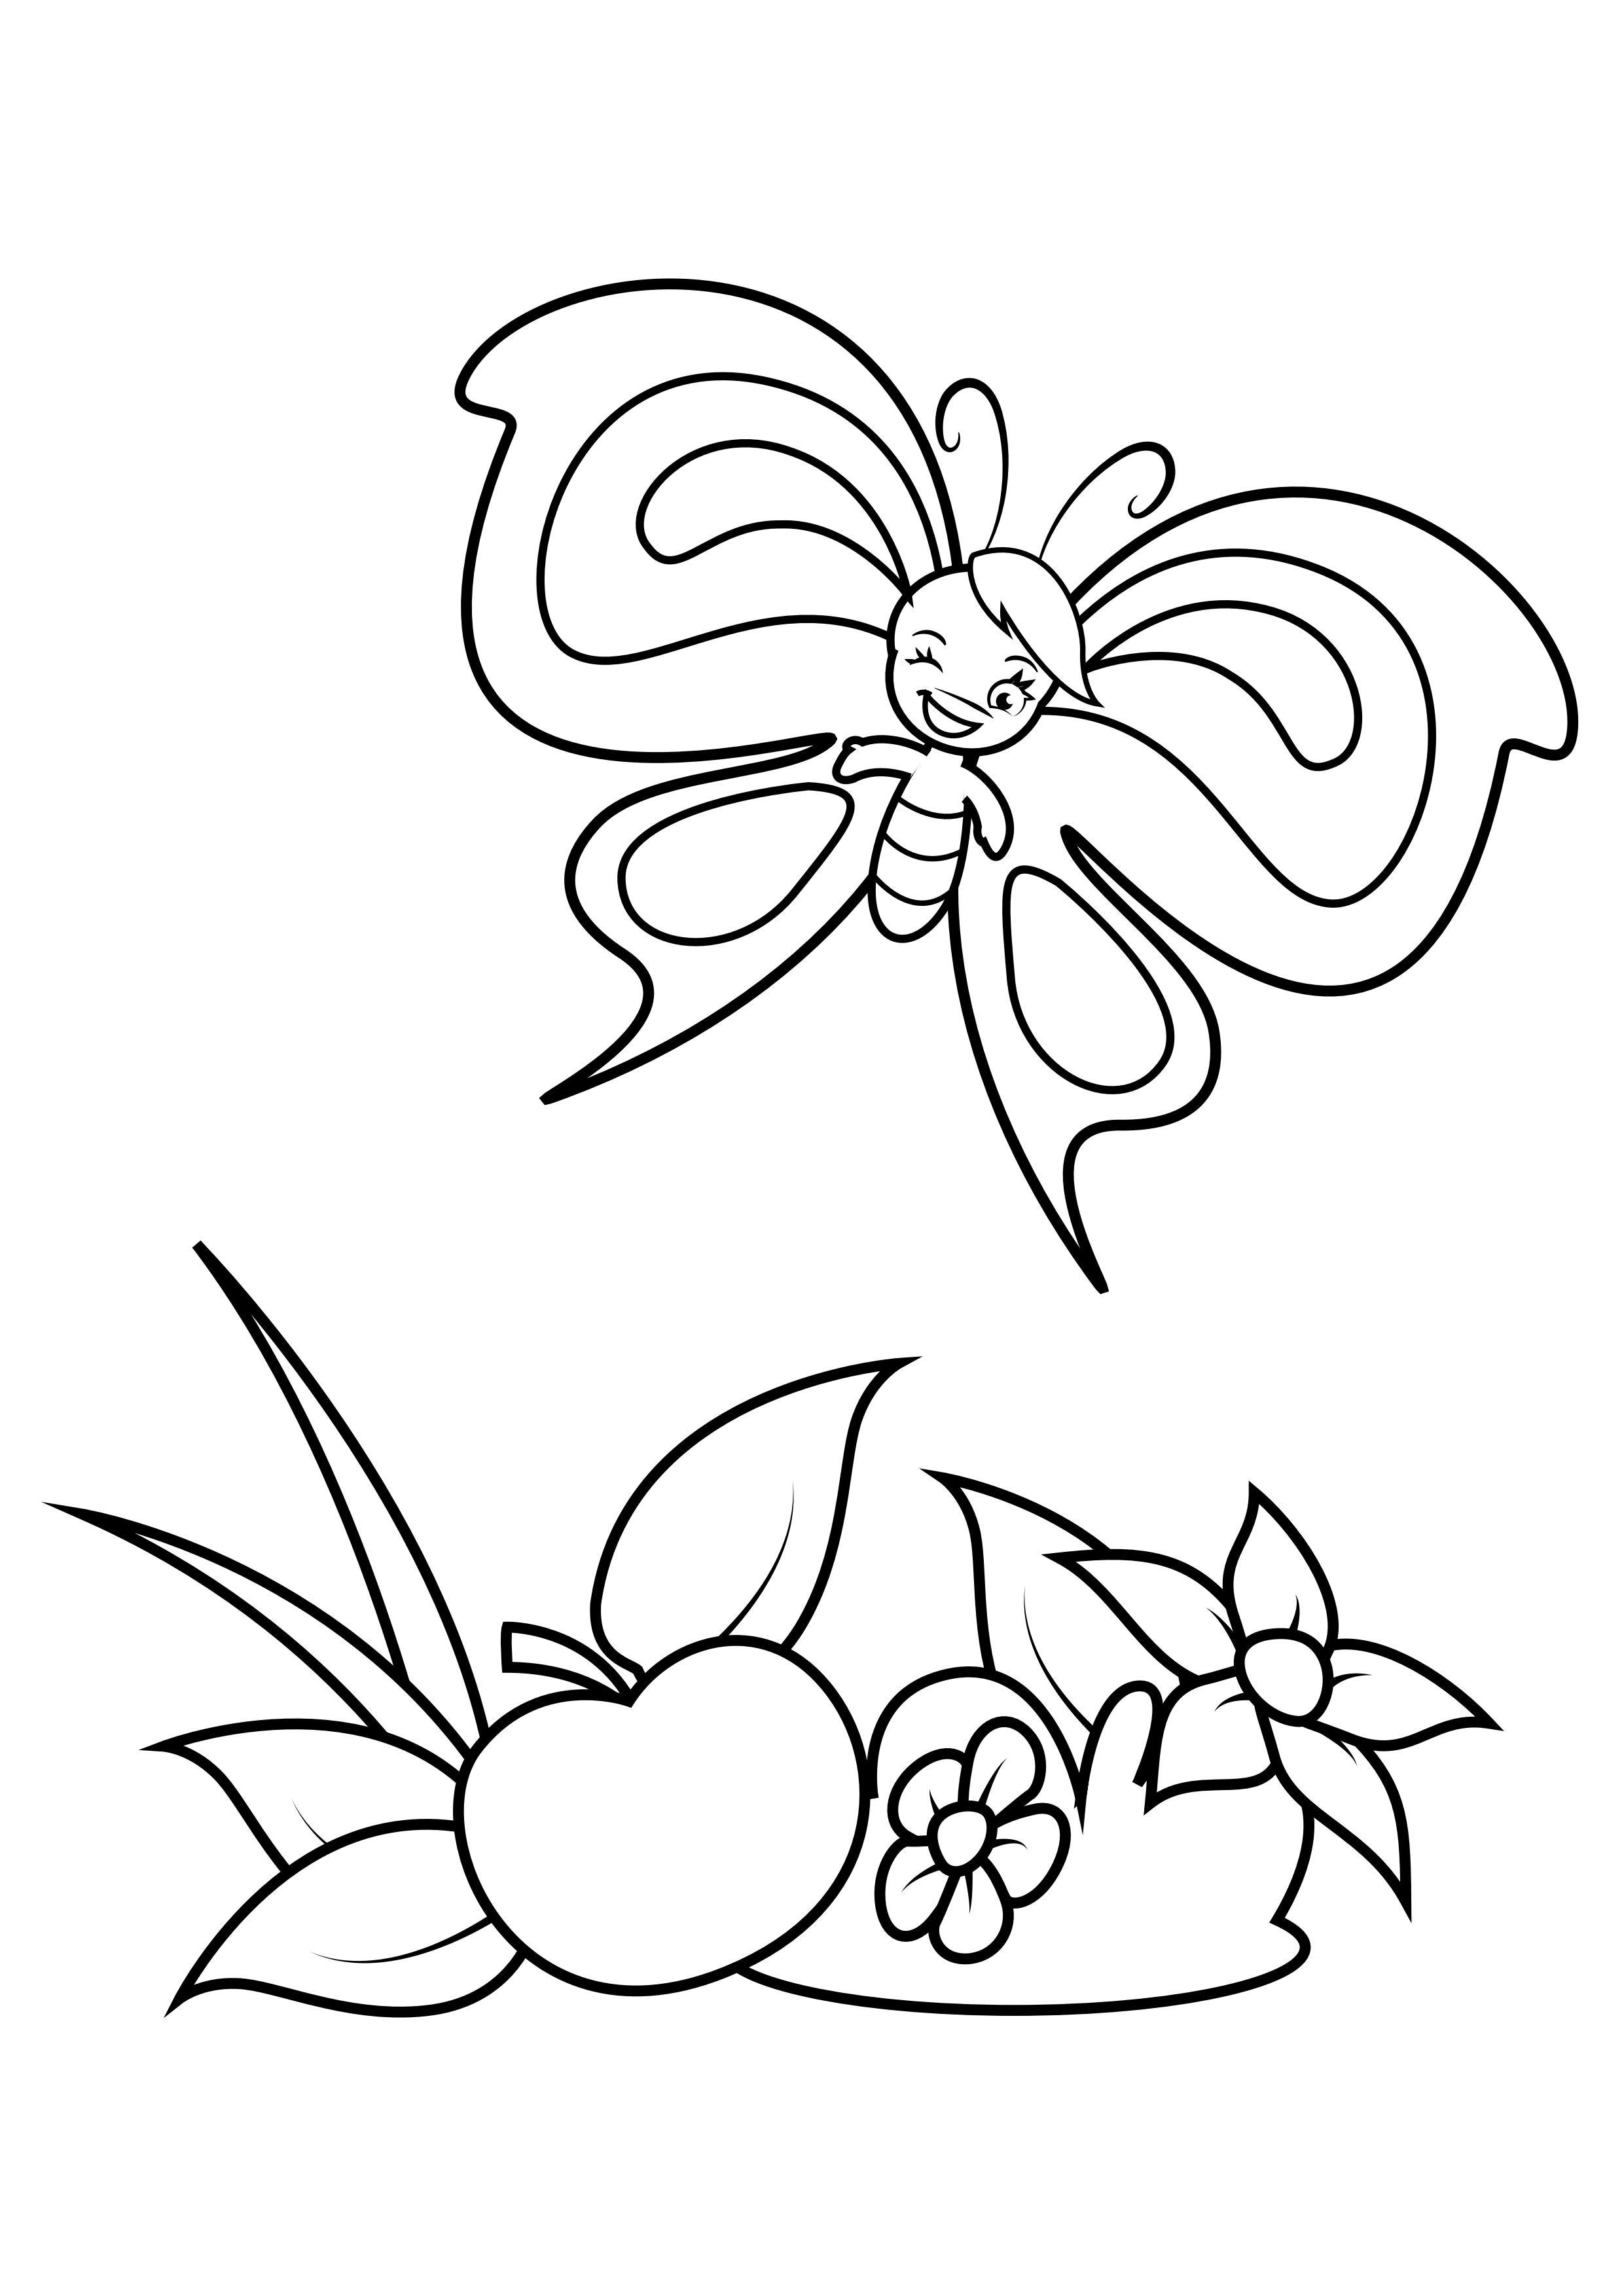 Coloring page butterfly sees an apple